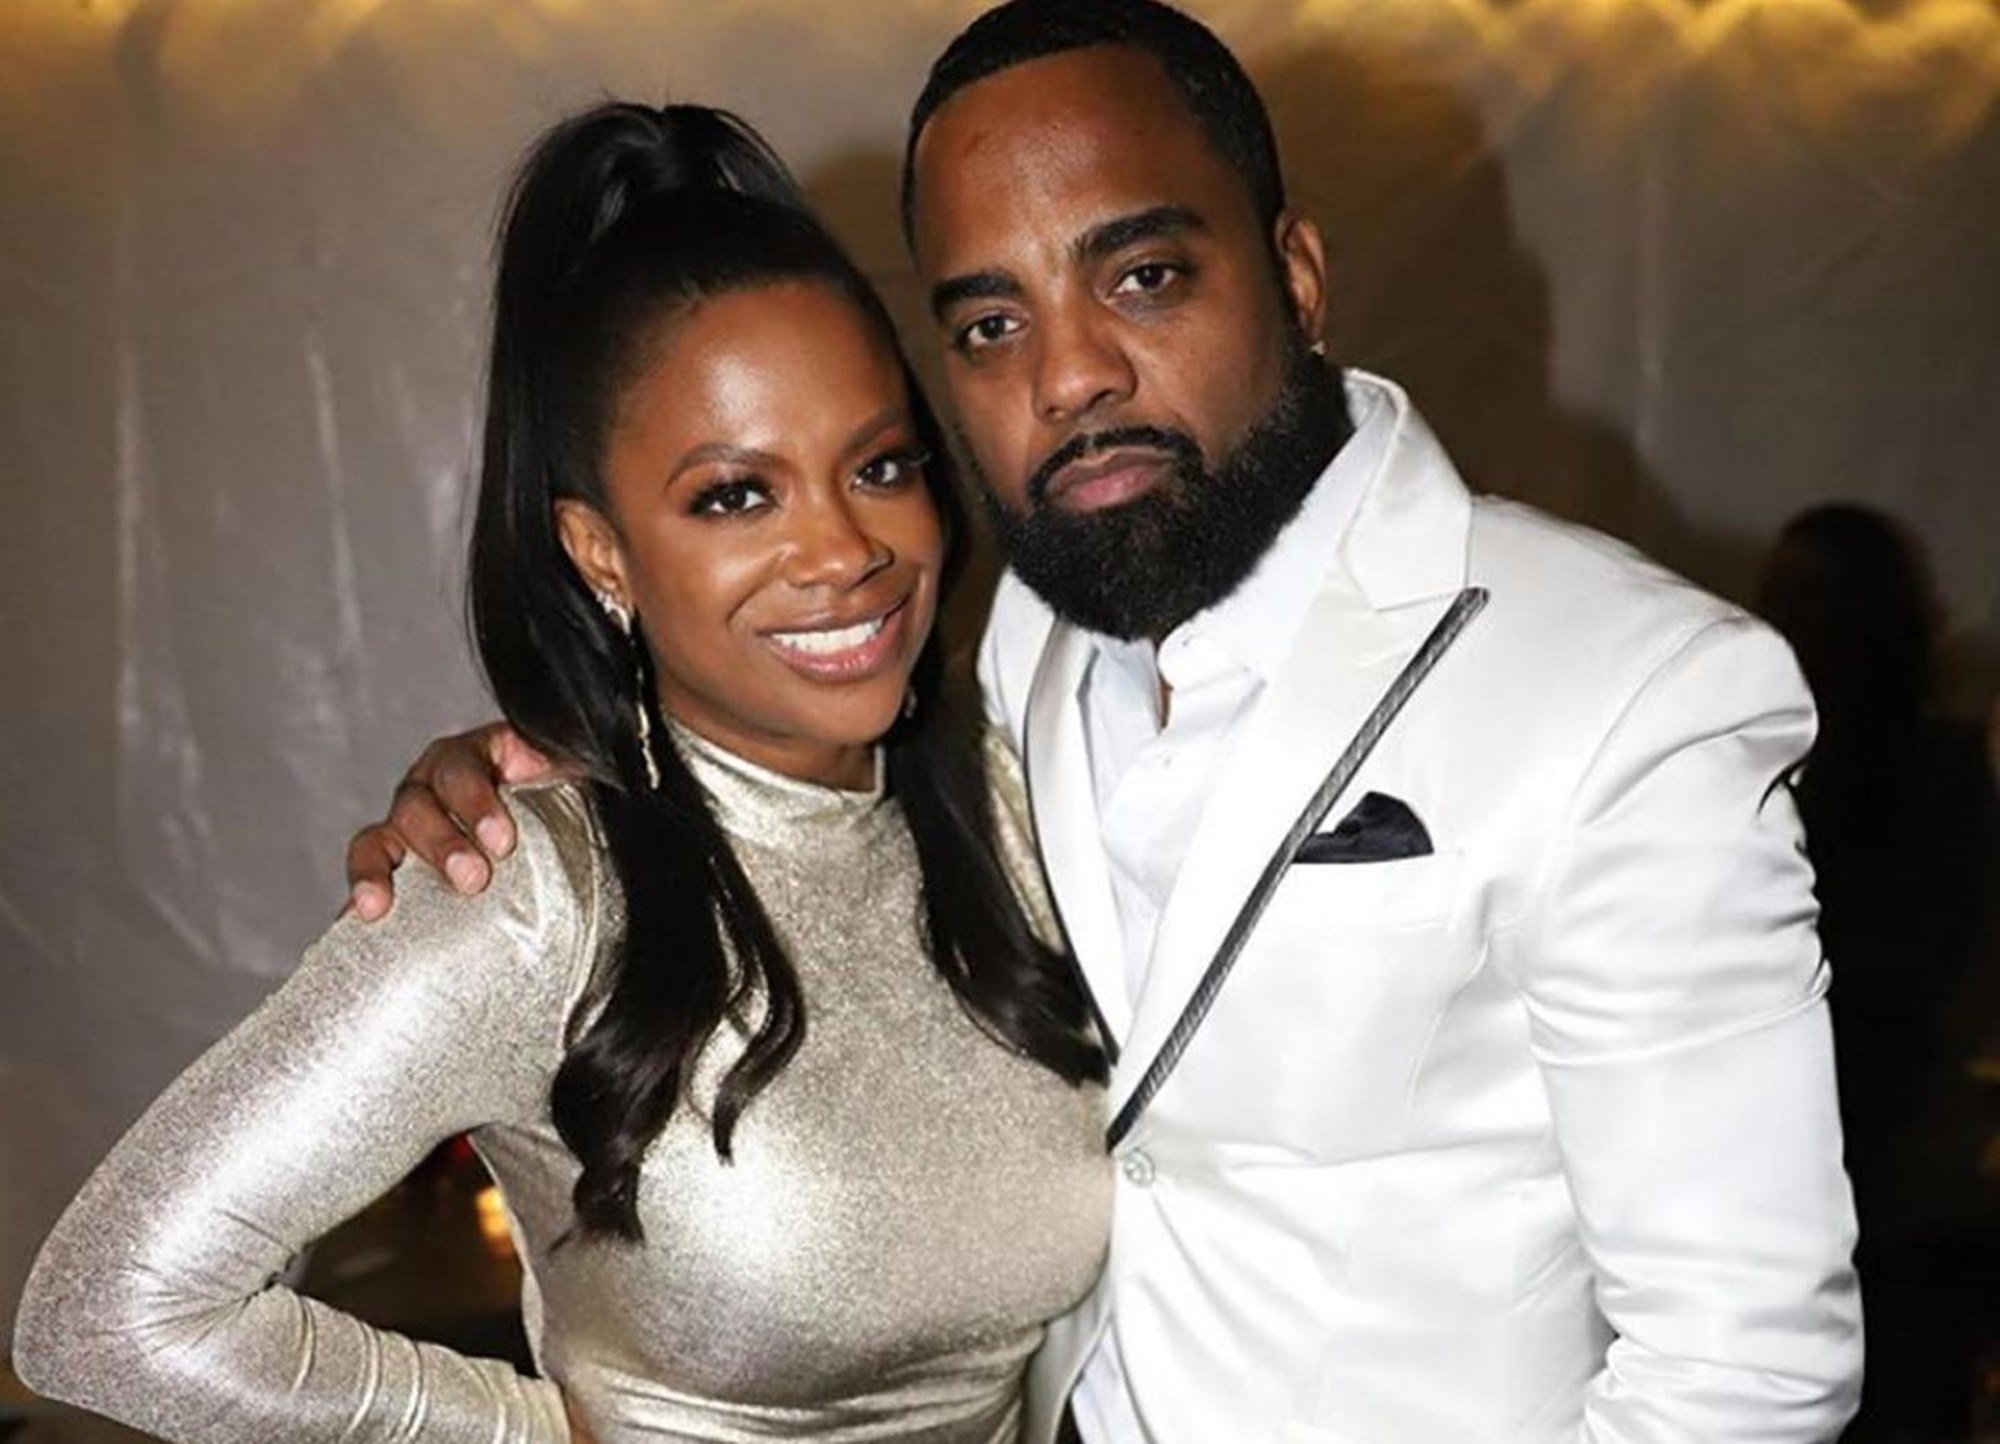 Kandi Burruss Shares A Scandalous Photo With Todd Tucker Ahead Of Valentine’s Day That Has Fans Talking